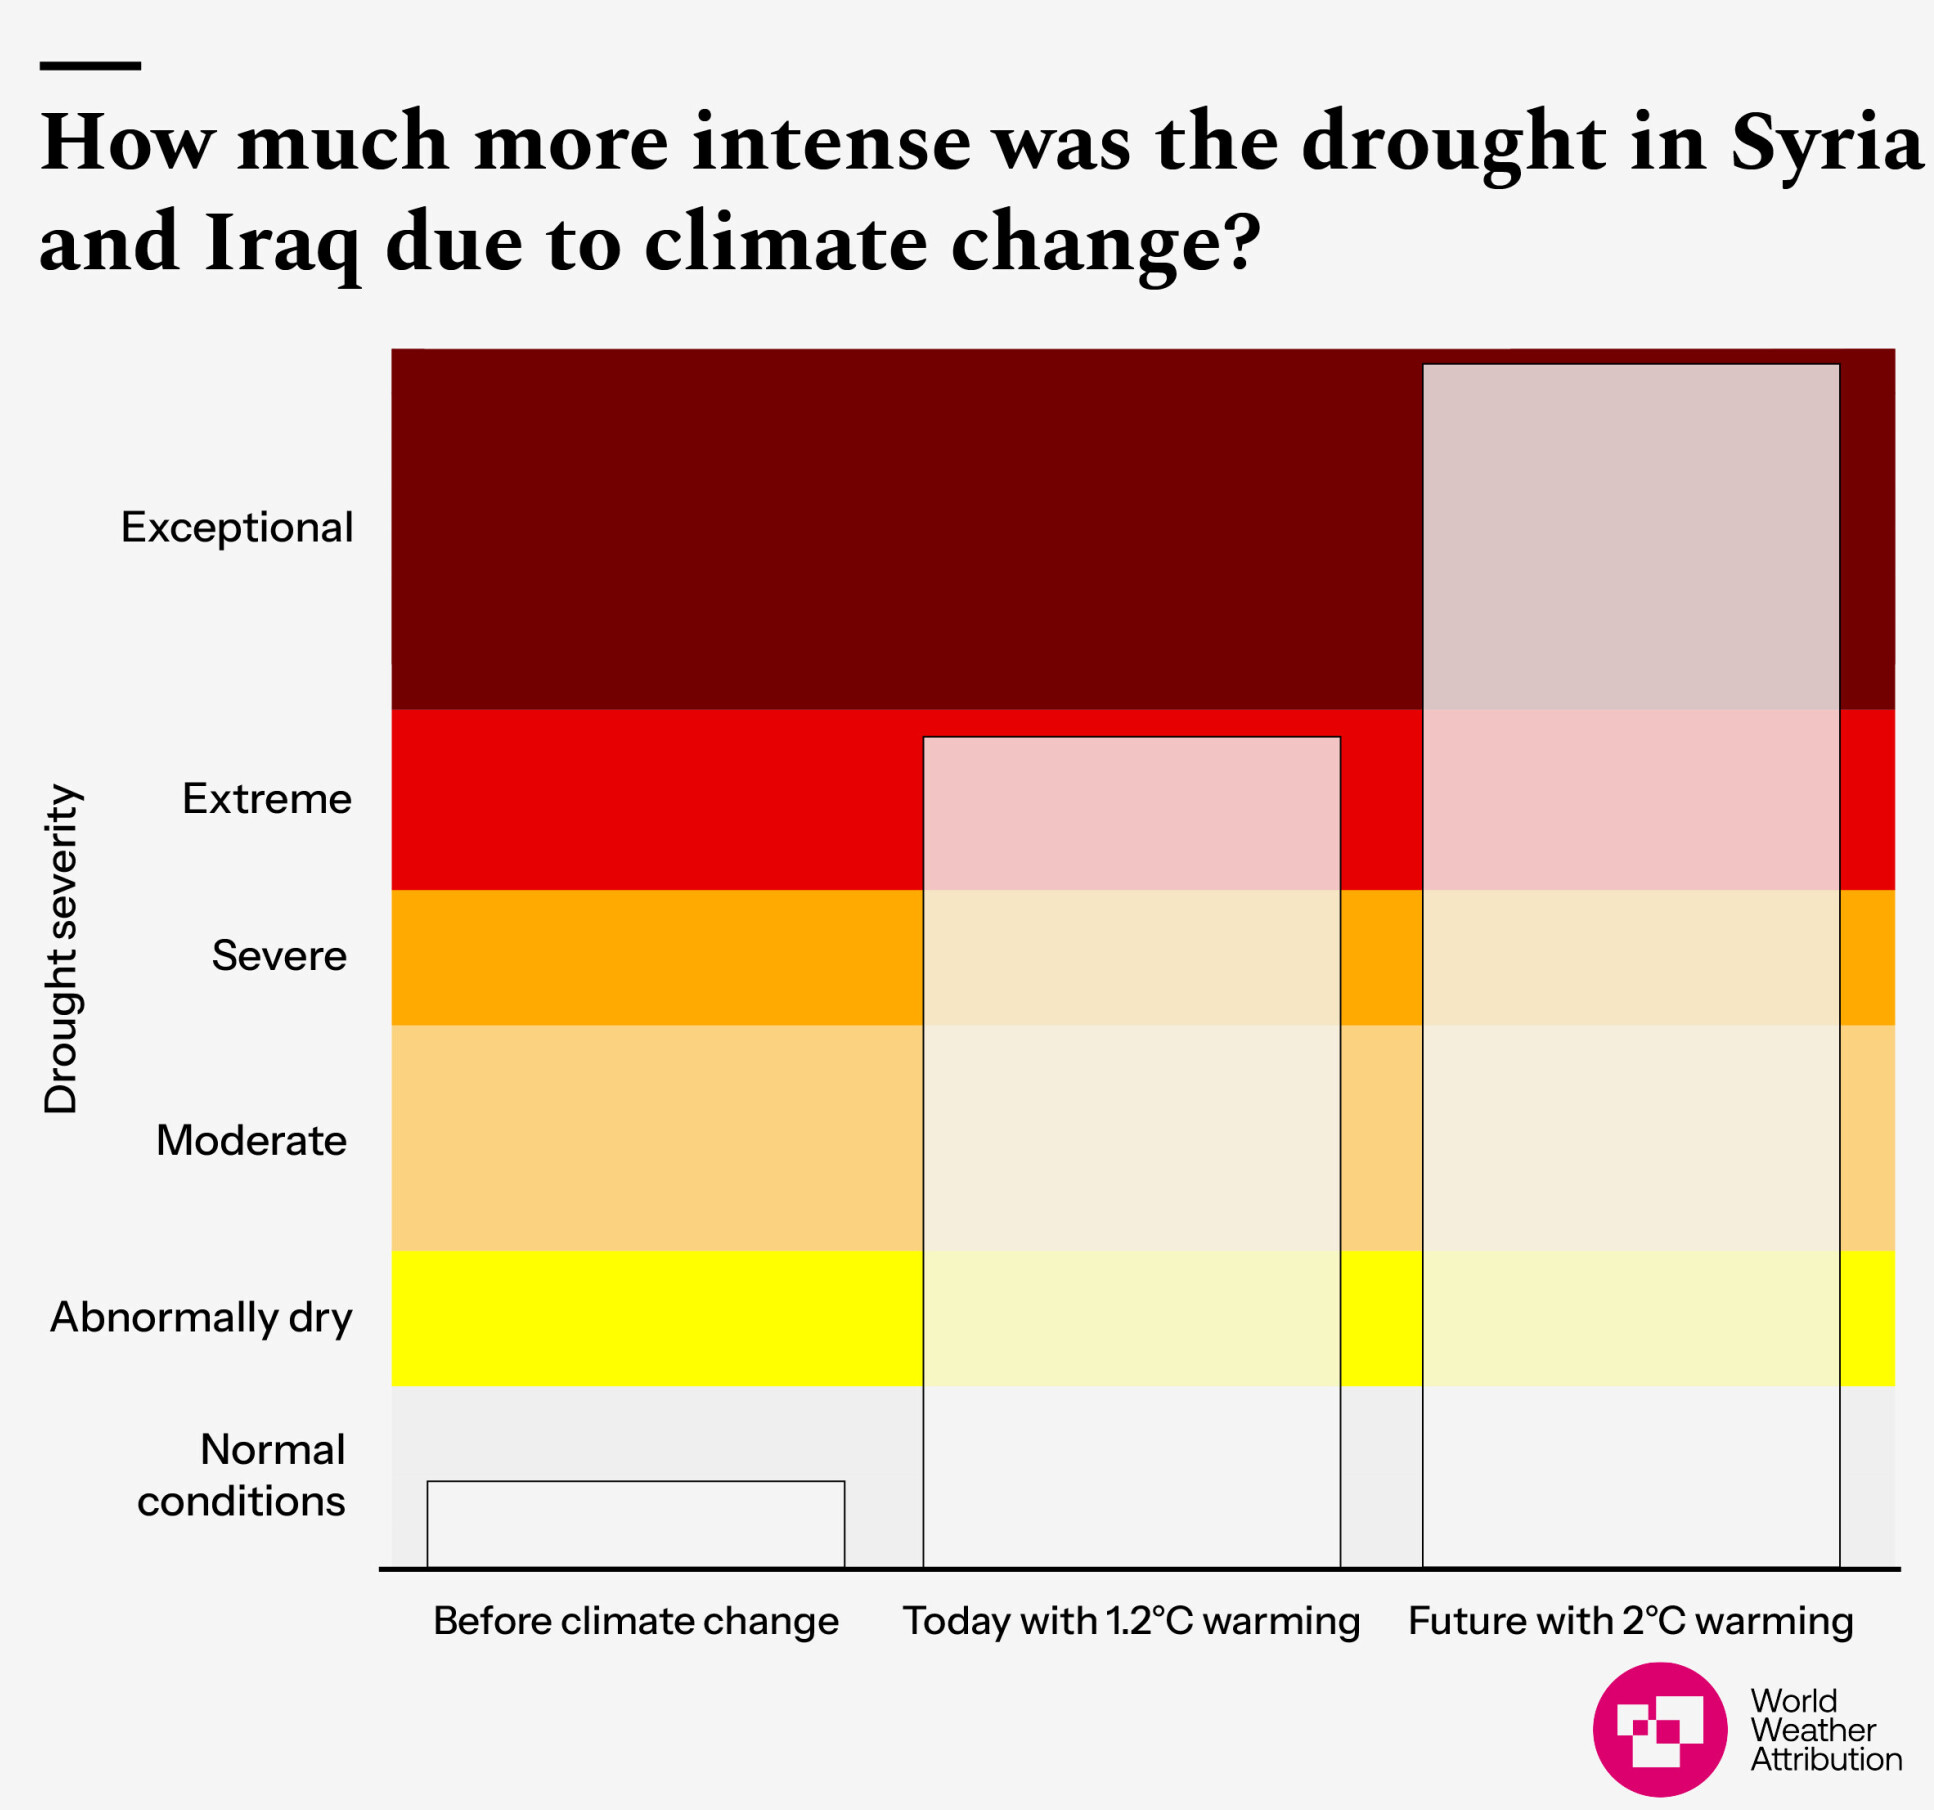 A graph showing changes in the intensity of drought in Syria and Iraq due to climate change.